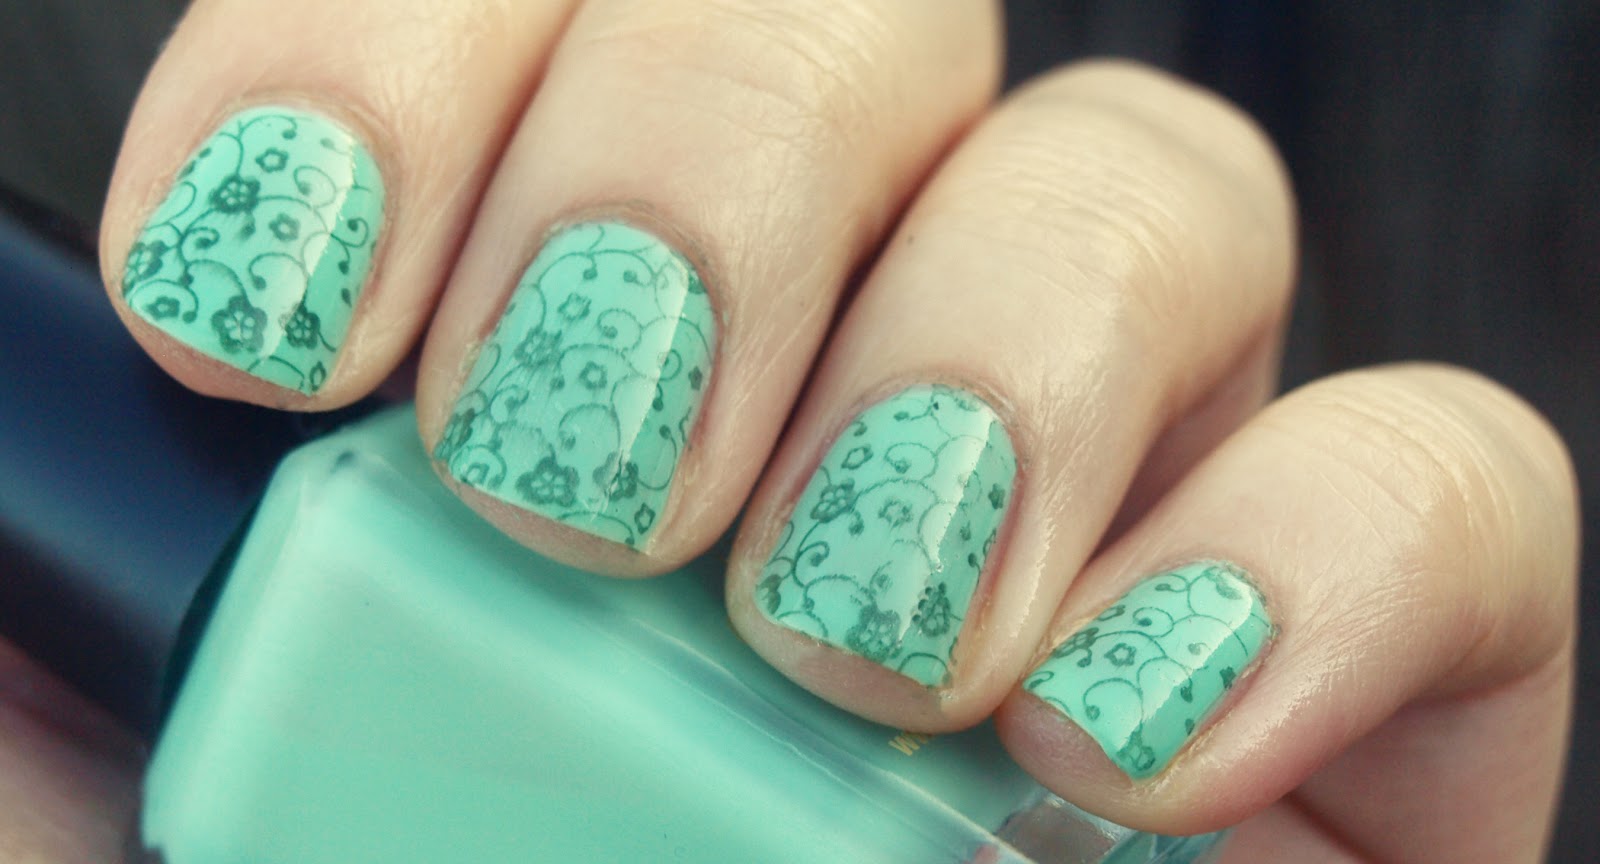 5. "Mint Green Nails for a Fresh Spring Look" - wide 6